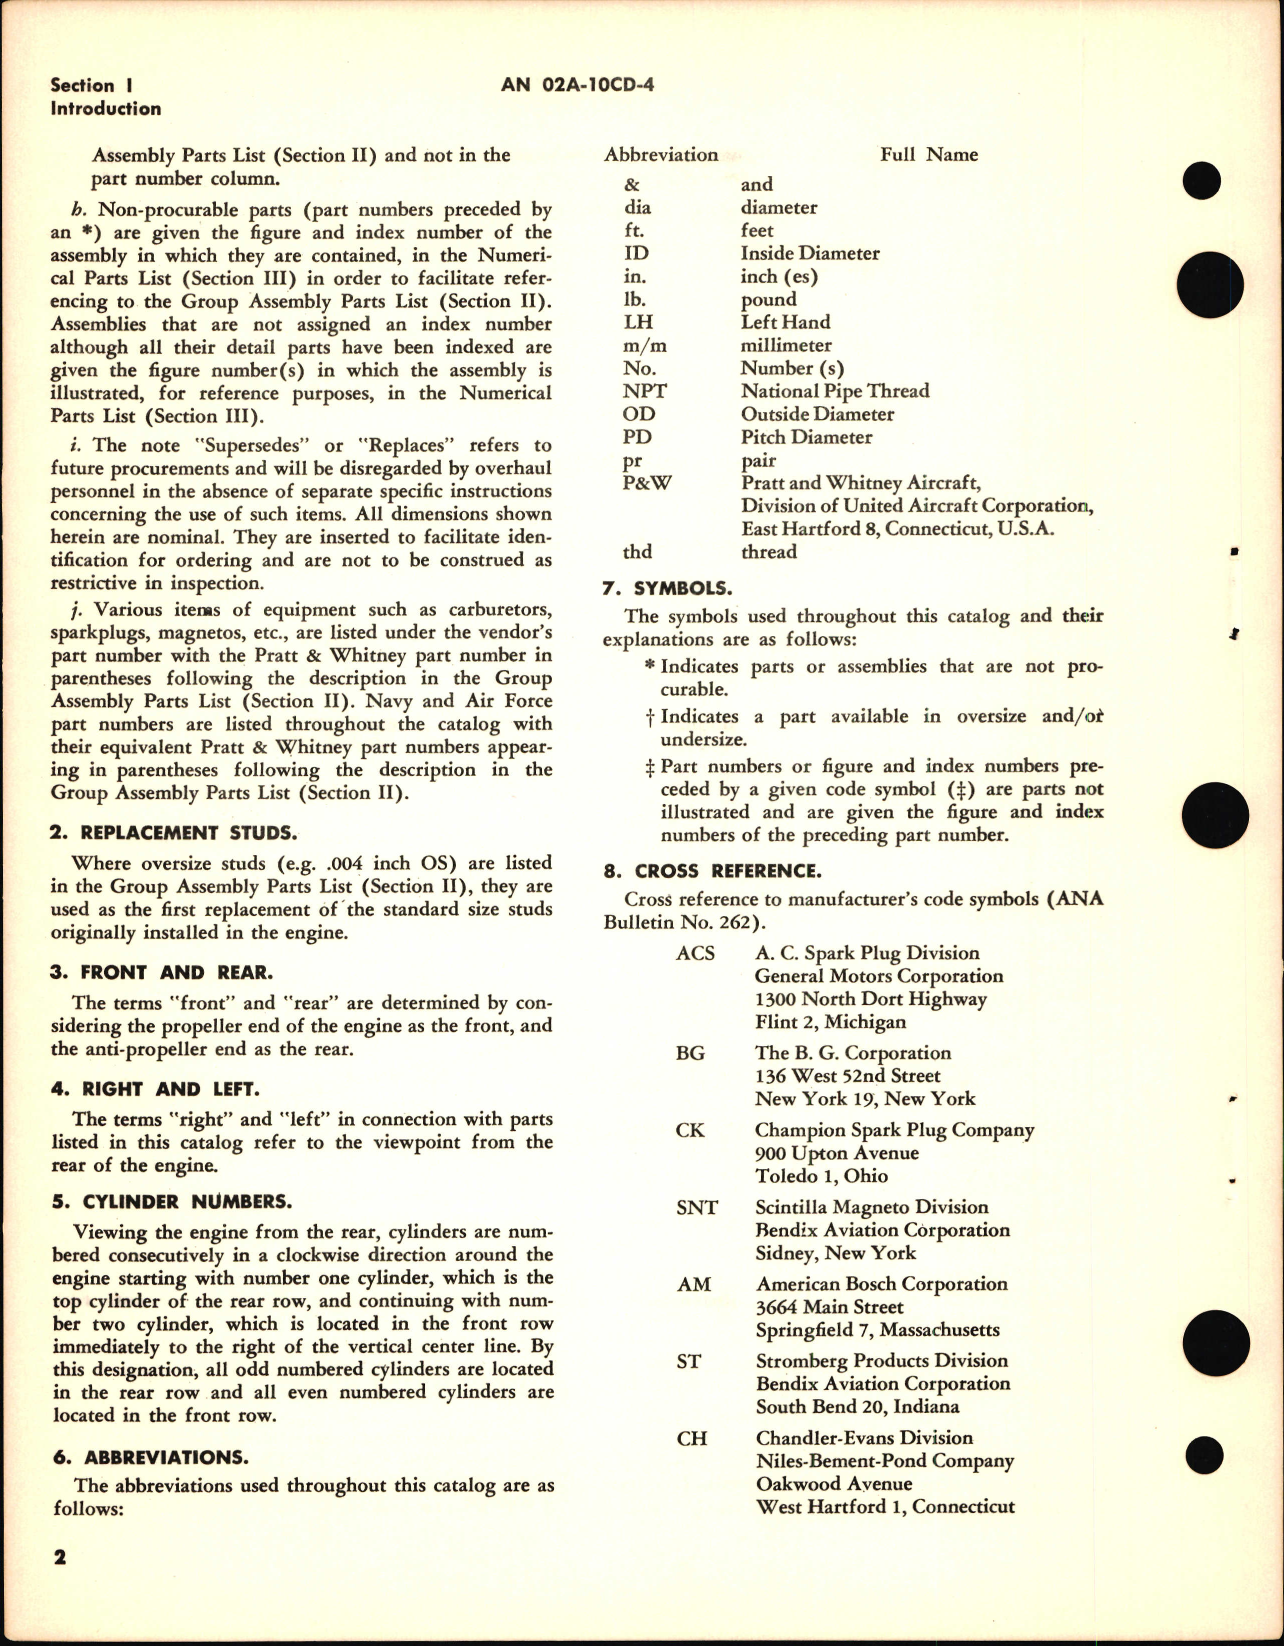 Sample page 8 from AirCorps Library document: Parts Catalog for Models R-1830, -43, -65, -90C and -90D Engines